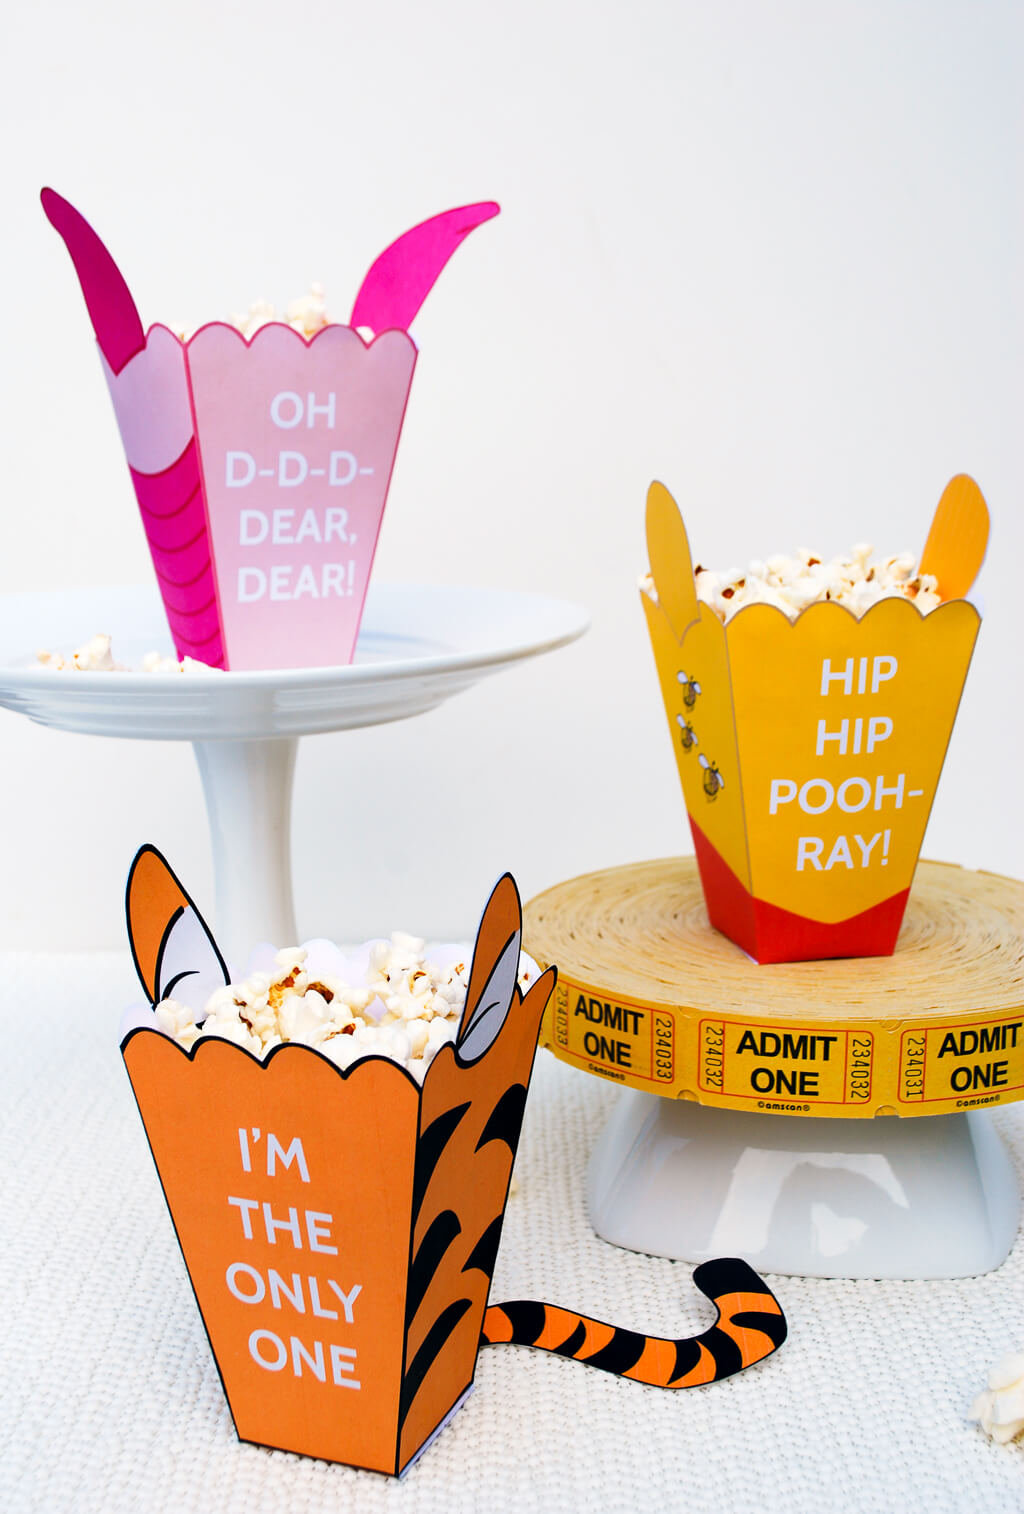 Winnie The Pooh free printable popcorn boxes for Pooh, Tigger and Piglet | Winnie The Pooh birthday party | Winne The Pooh movie night #spon